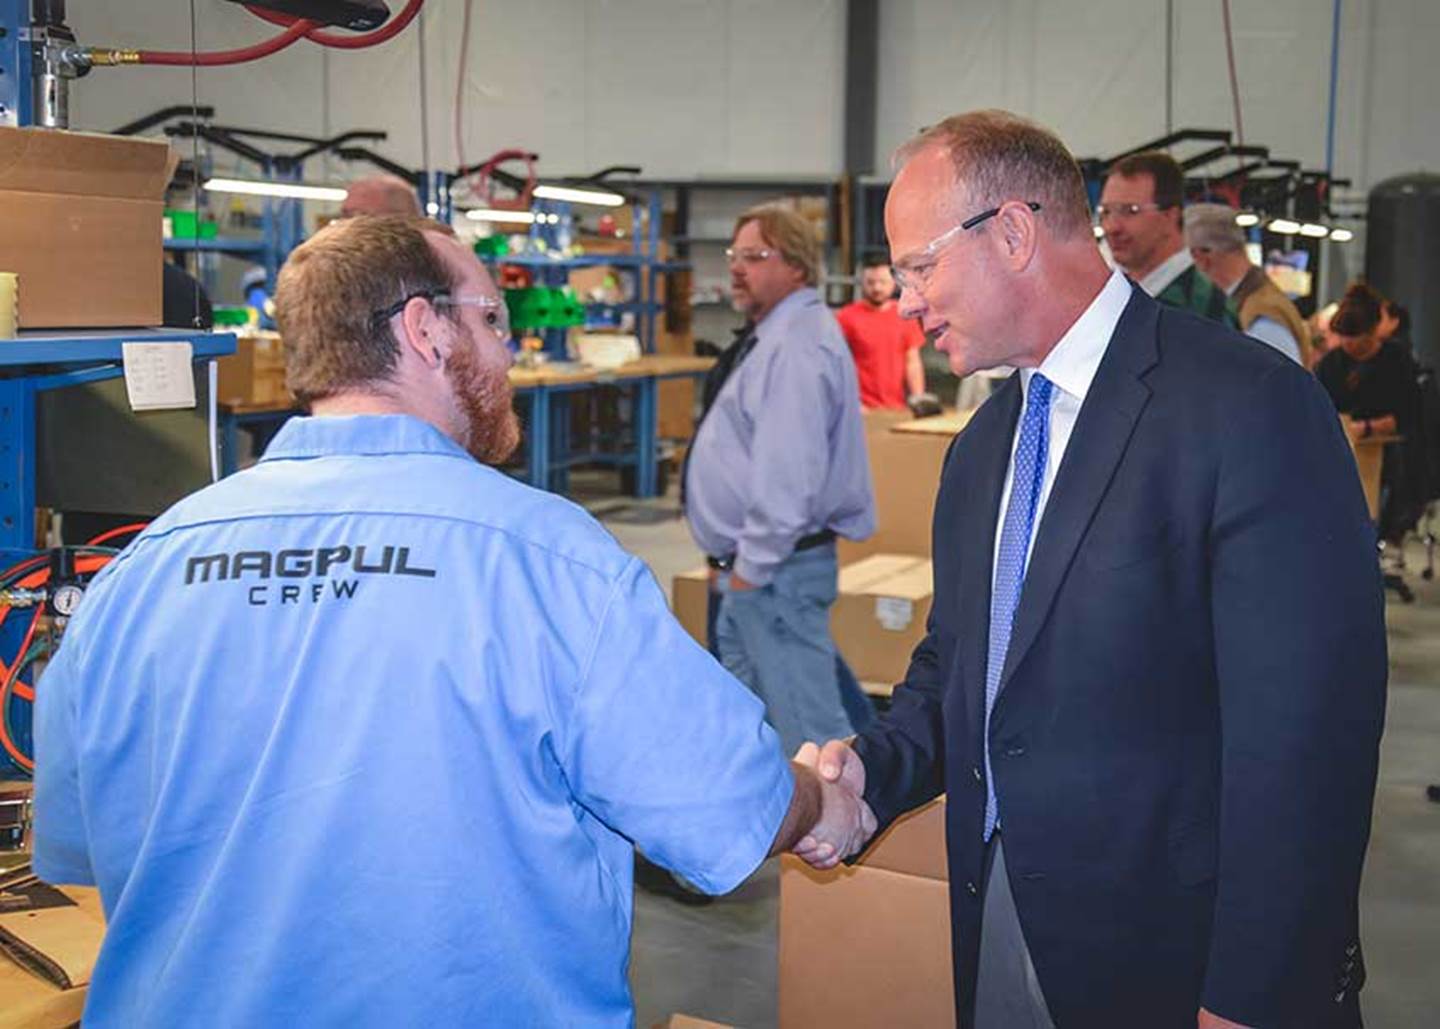 <em>Then-Wyoming Governor Matt Mead tours the Magpul facility following the company's move from Colorado (Magpul)</em>